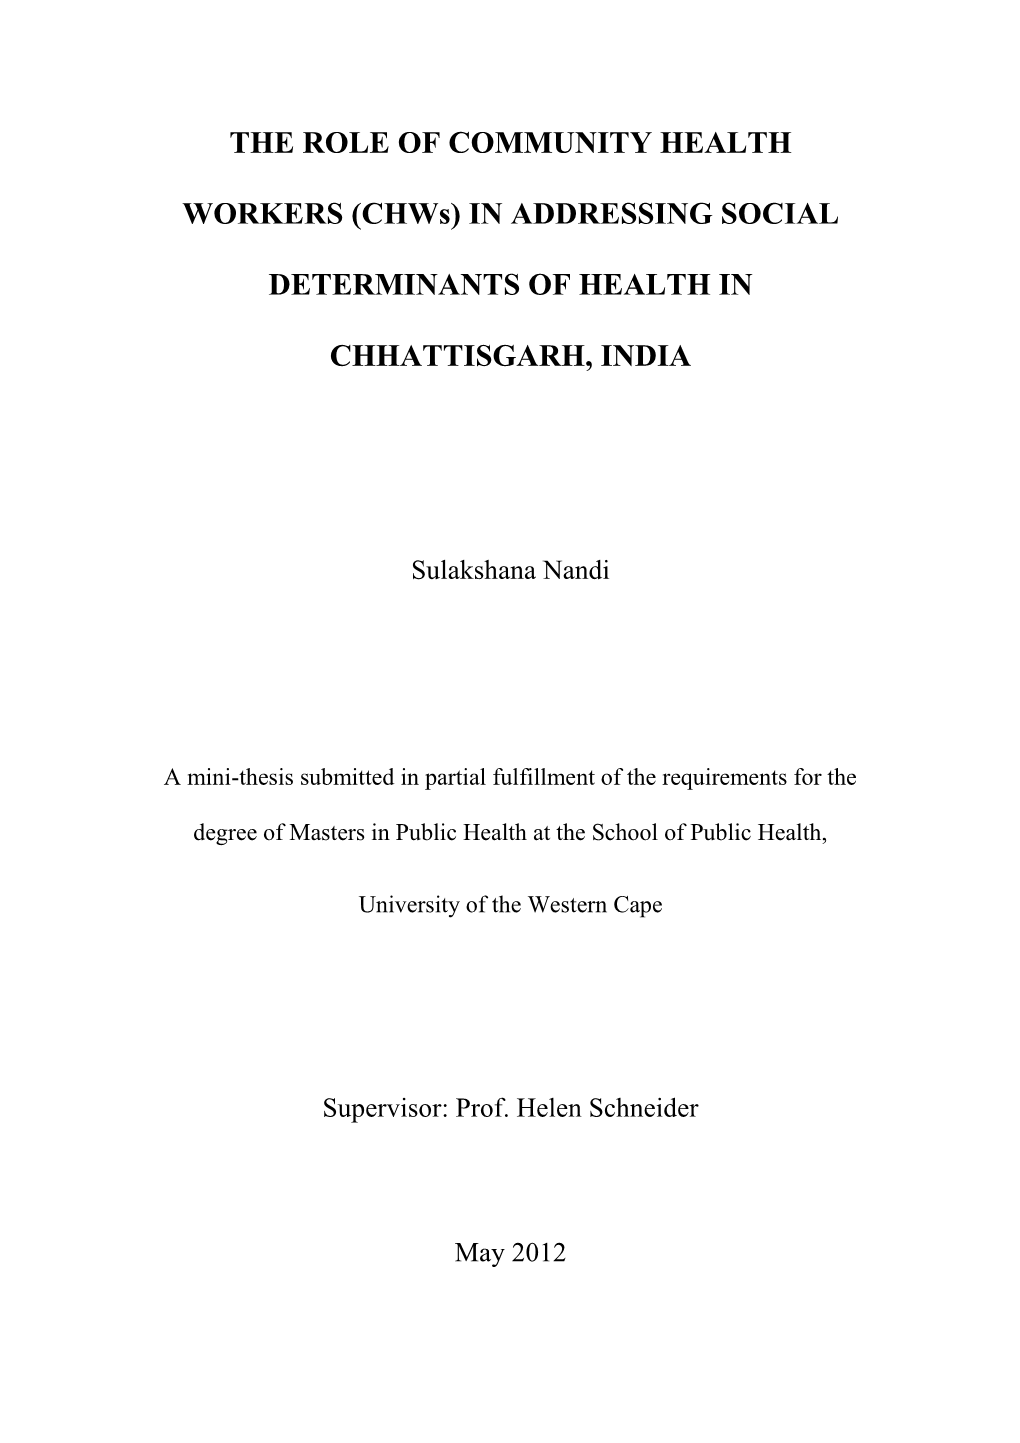 The Role of Community Health Workers (Chws) in Addressing Social Determinants of Health in Chhattisgarh